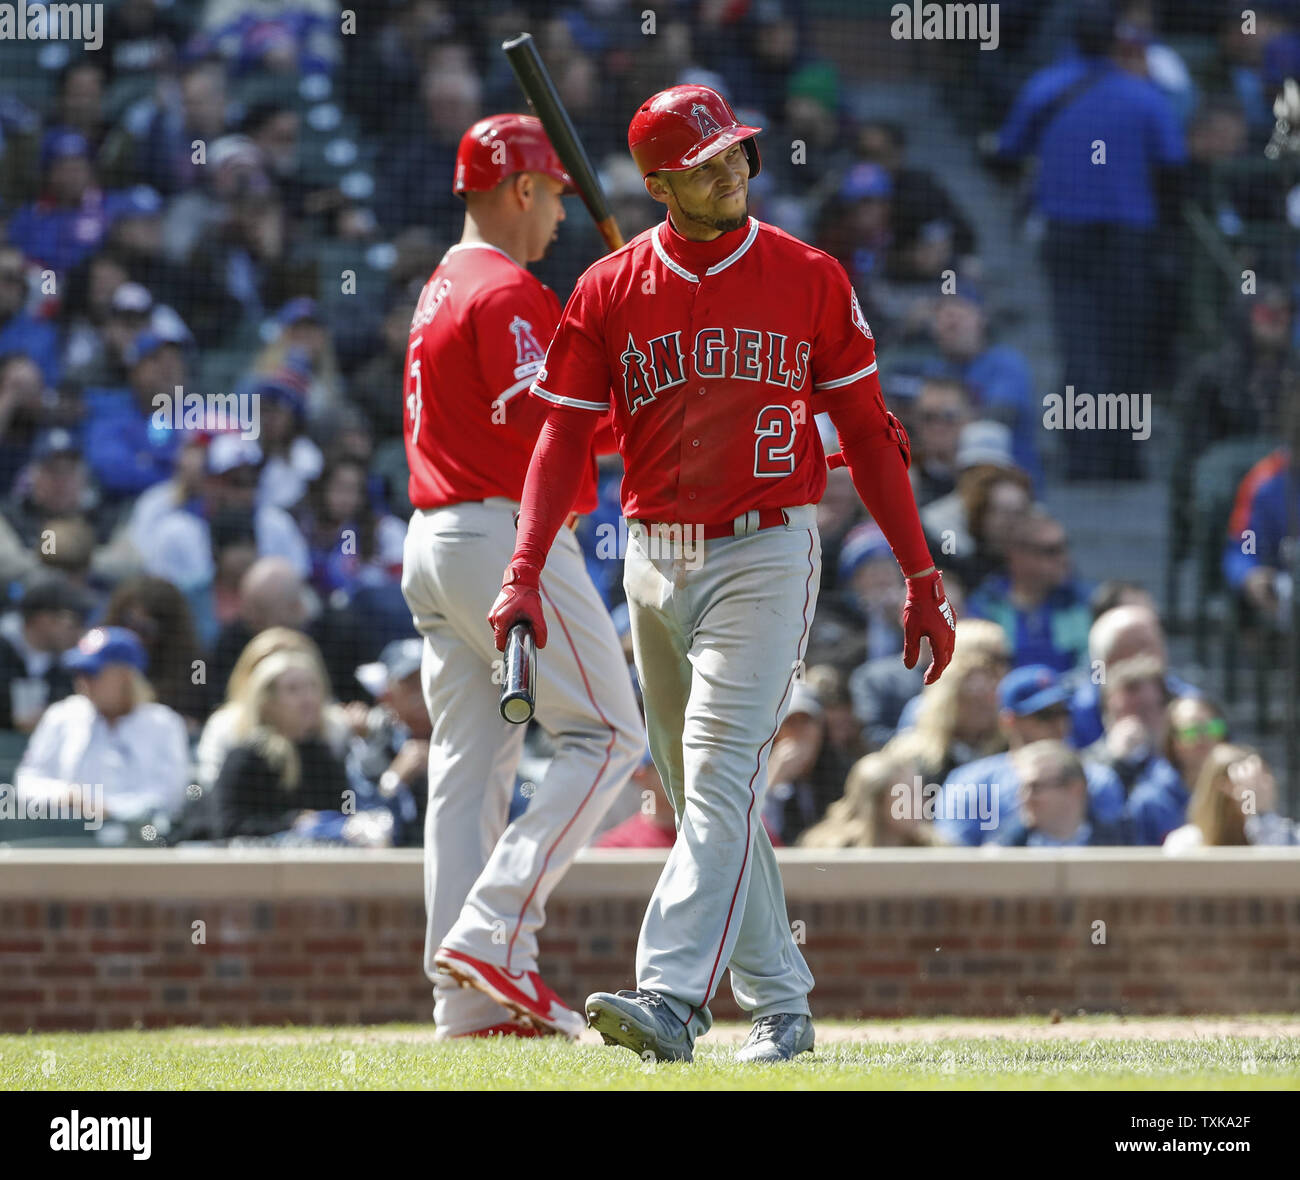 Los Angeles Angels shortstop Andrelton Simmons reacts after striking out against the Chicago Cubs in the sixth inning at Wrigley Field on April 12, 2019 in Chicago. Photo by Kamil Krzaczynski/UPI Stock Photo